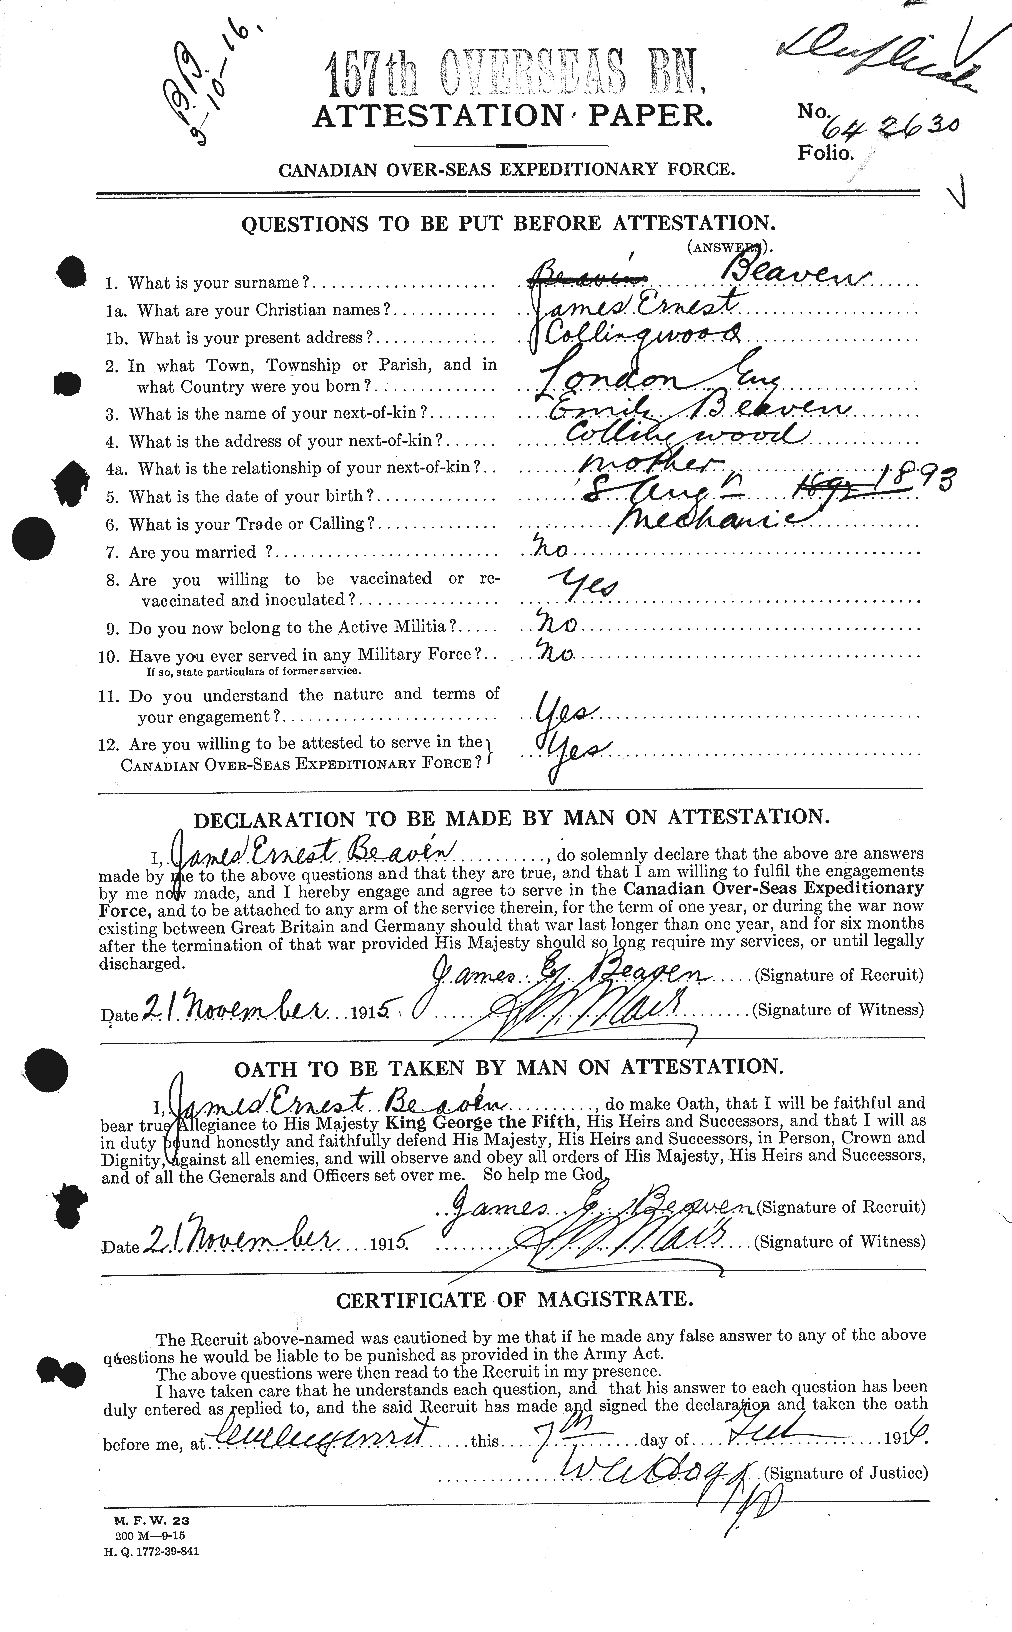 Personnel Records of the First World War - CEF 231907a